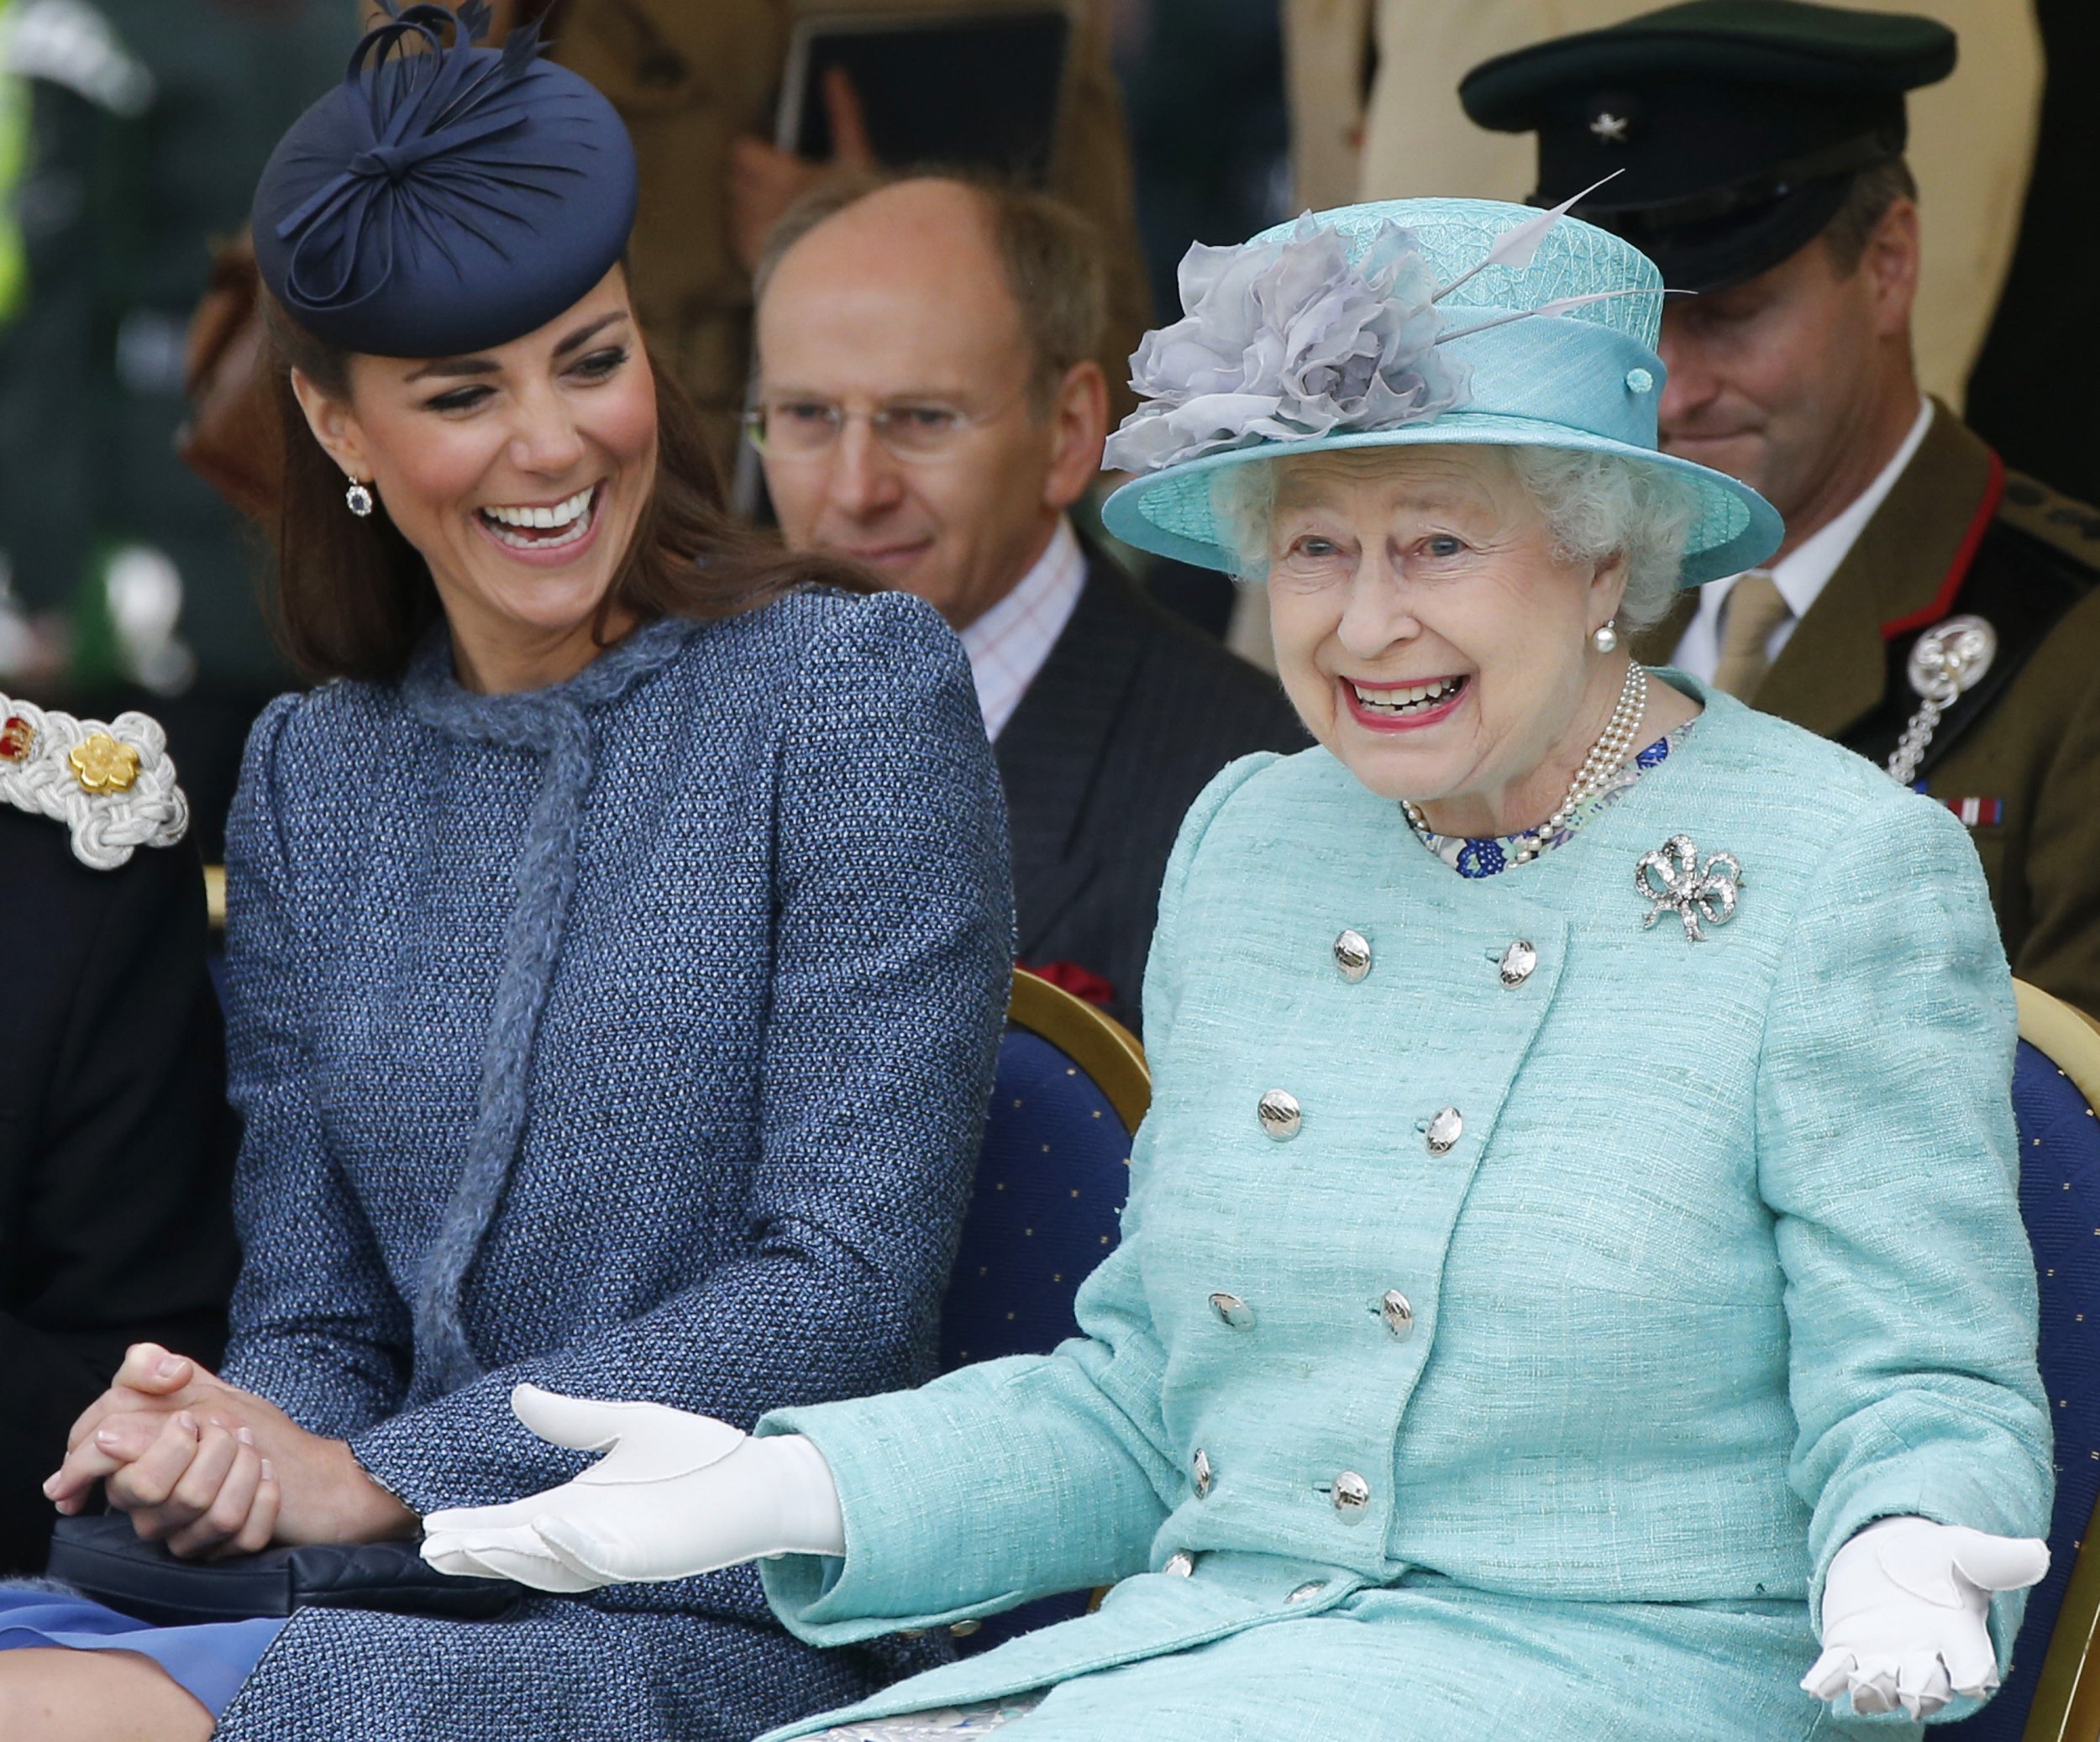 1105 Britains Catherine, Duchess of Cambridge L laughs as Queen Elizabeth gestures while they watch part of a childrens sports event during a visit to Vernon Park in Nottingham